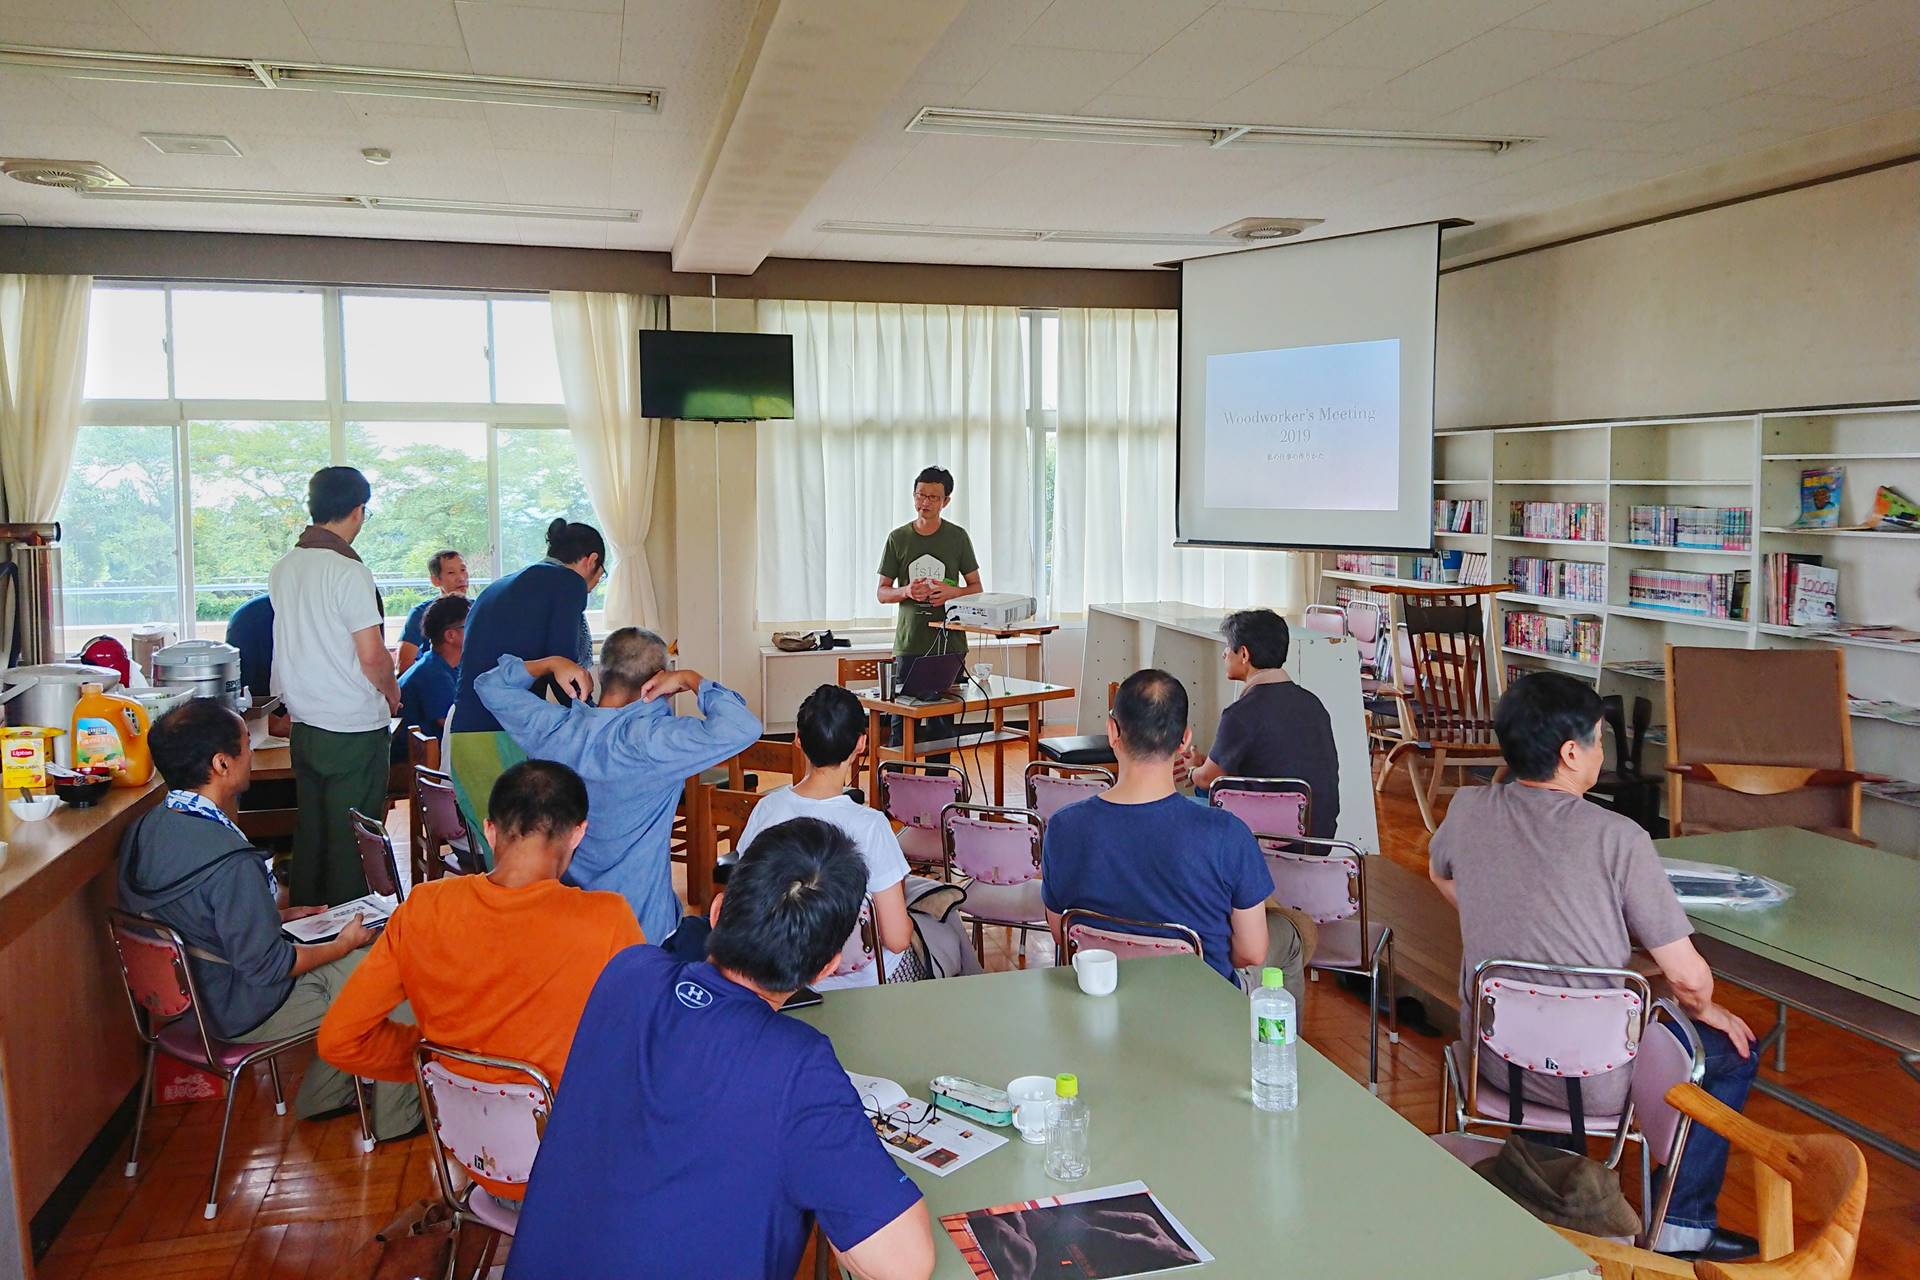 Woodworker's Meeting 2019 木工家 吉野崇裕 島崎信 